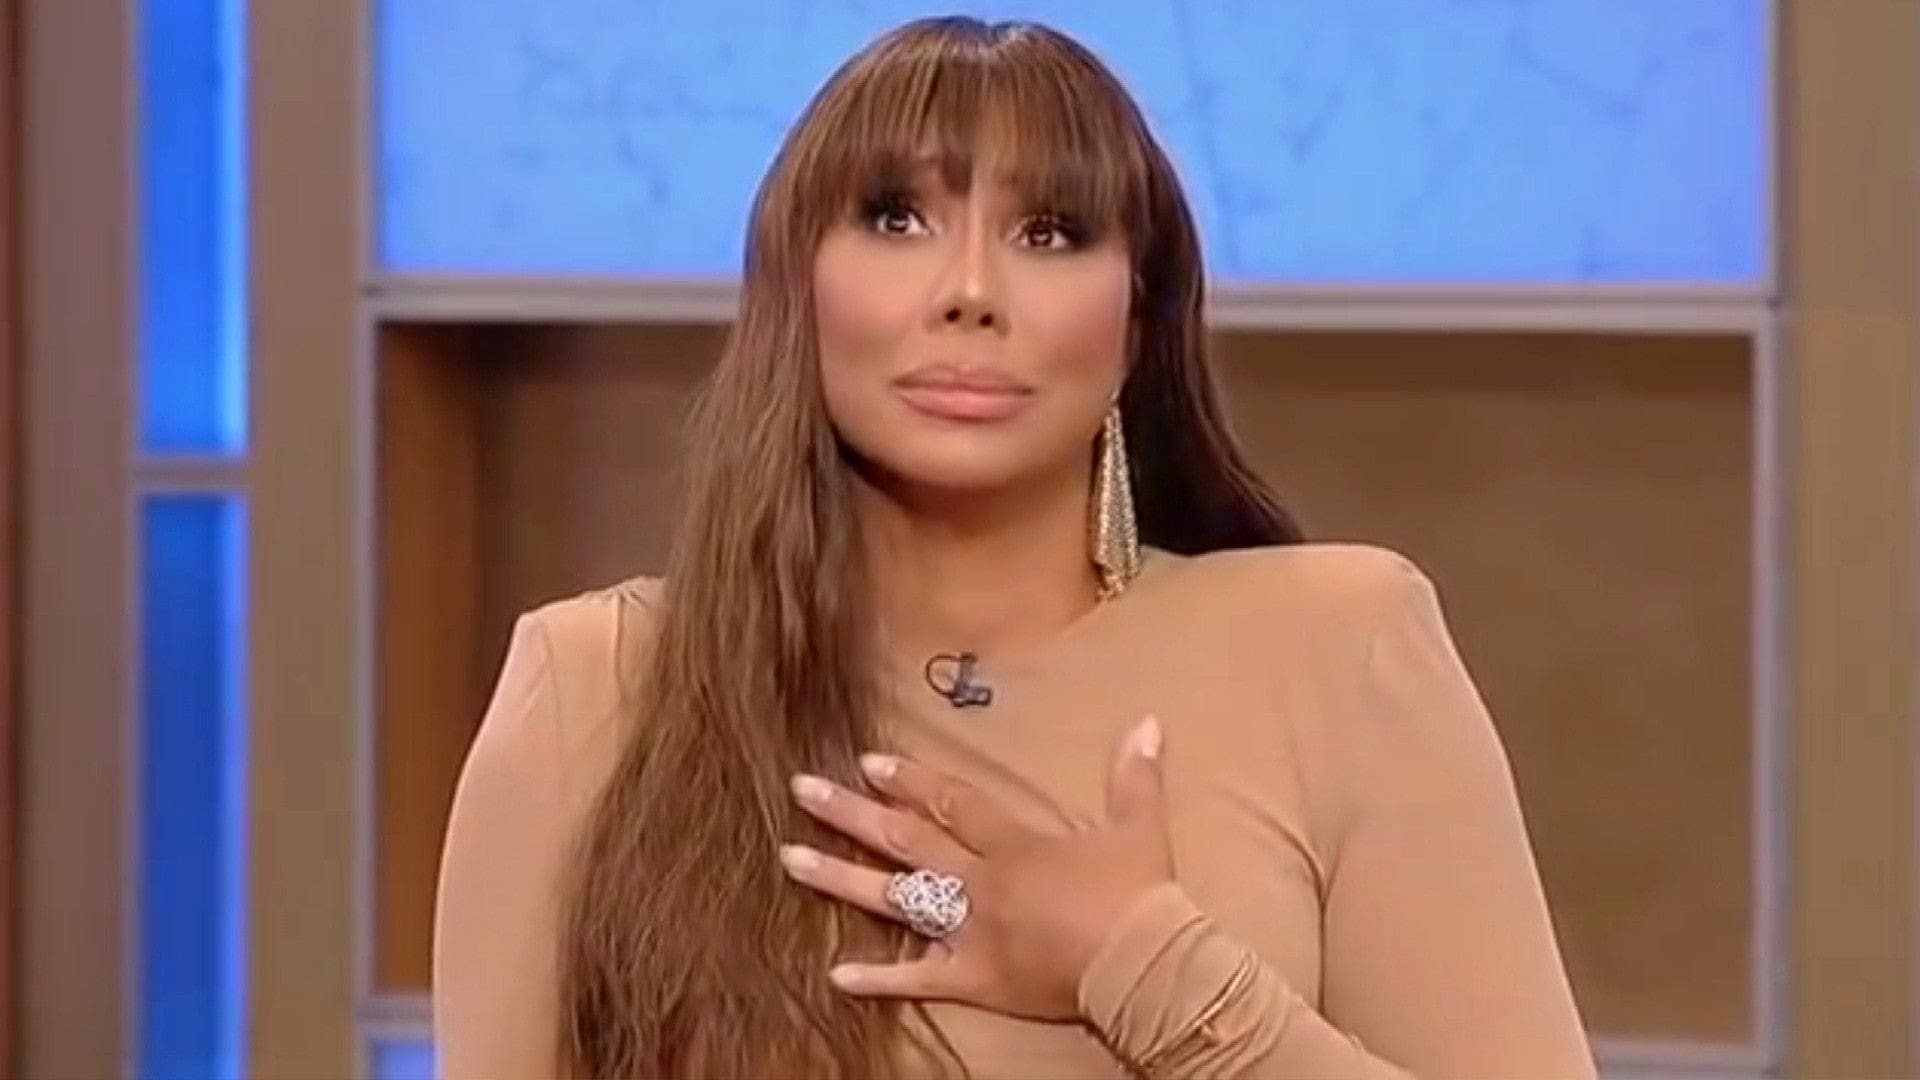 Tamar Braxton Flaunts Her 'Sober, Sound Mind And Body' - See Her Video Here